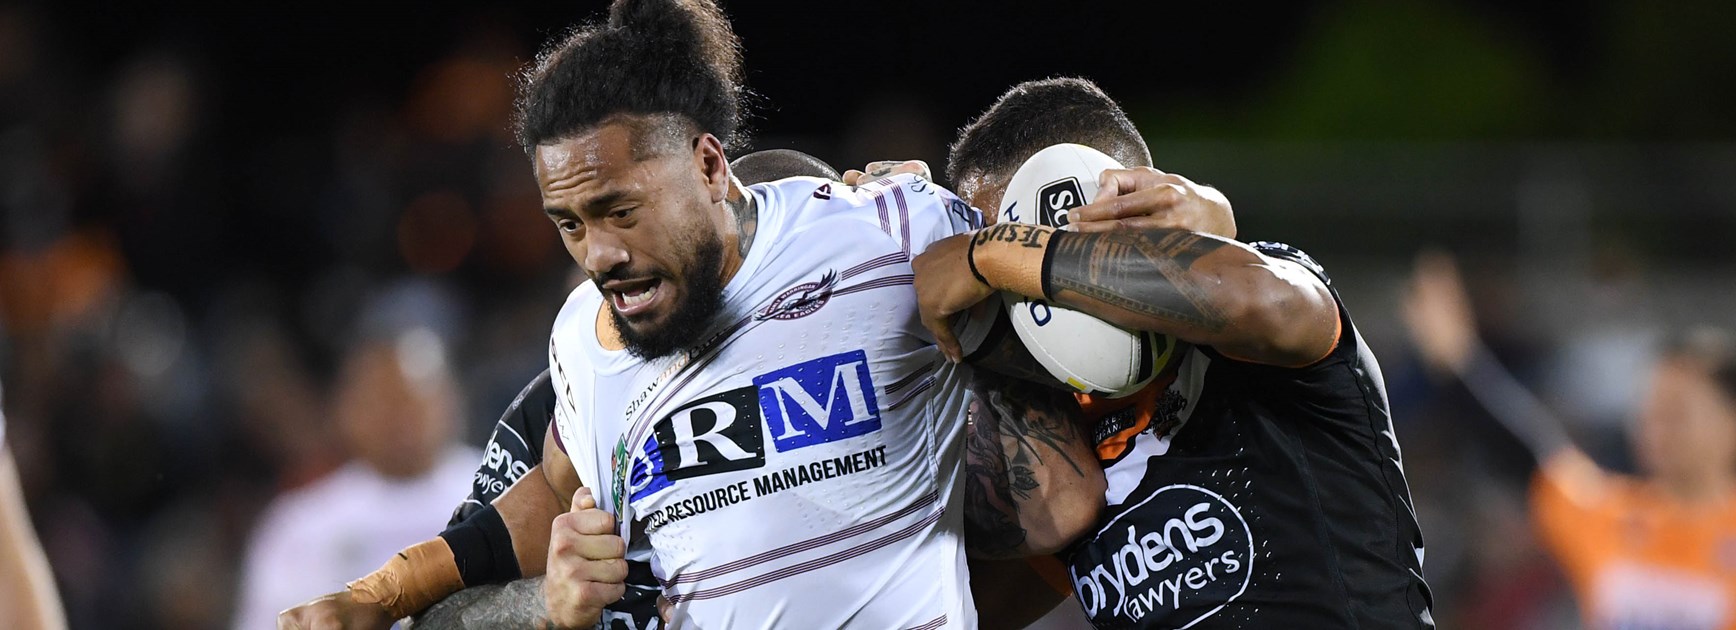 Wests Tigers edge Manly to keep finals hopes alive